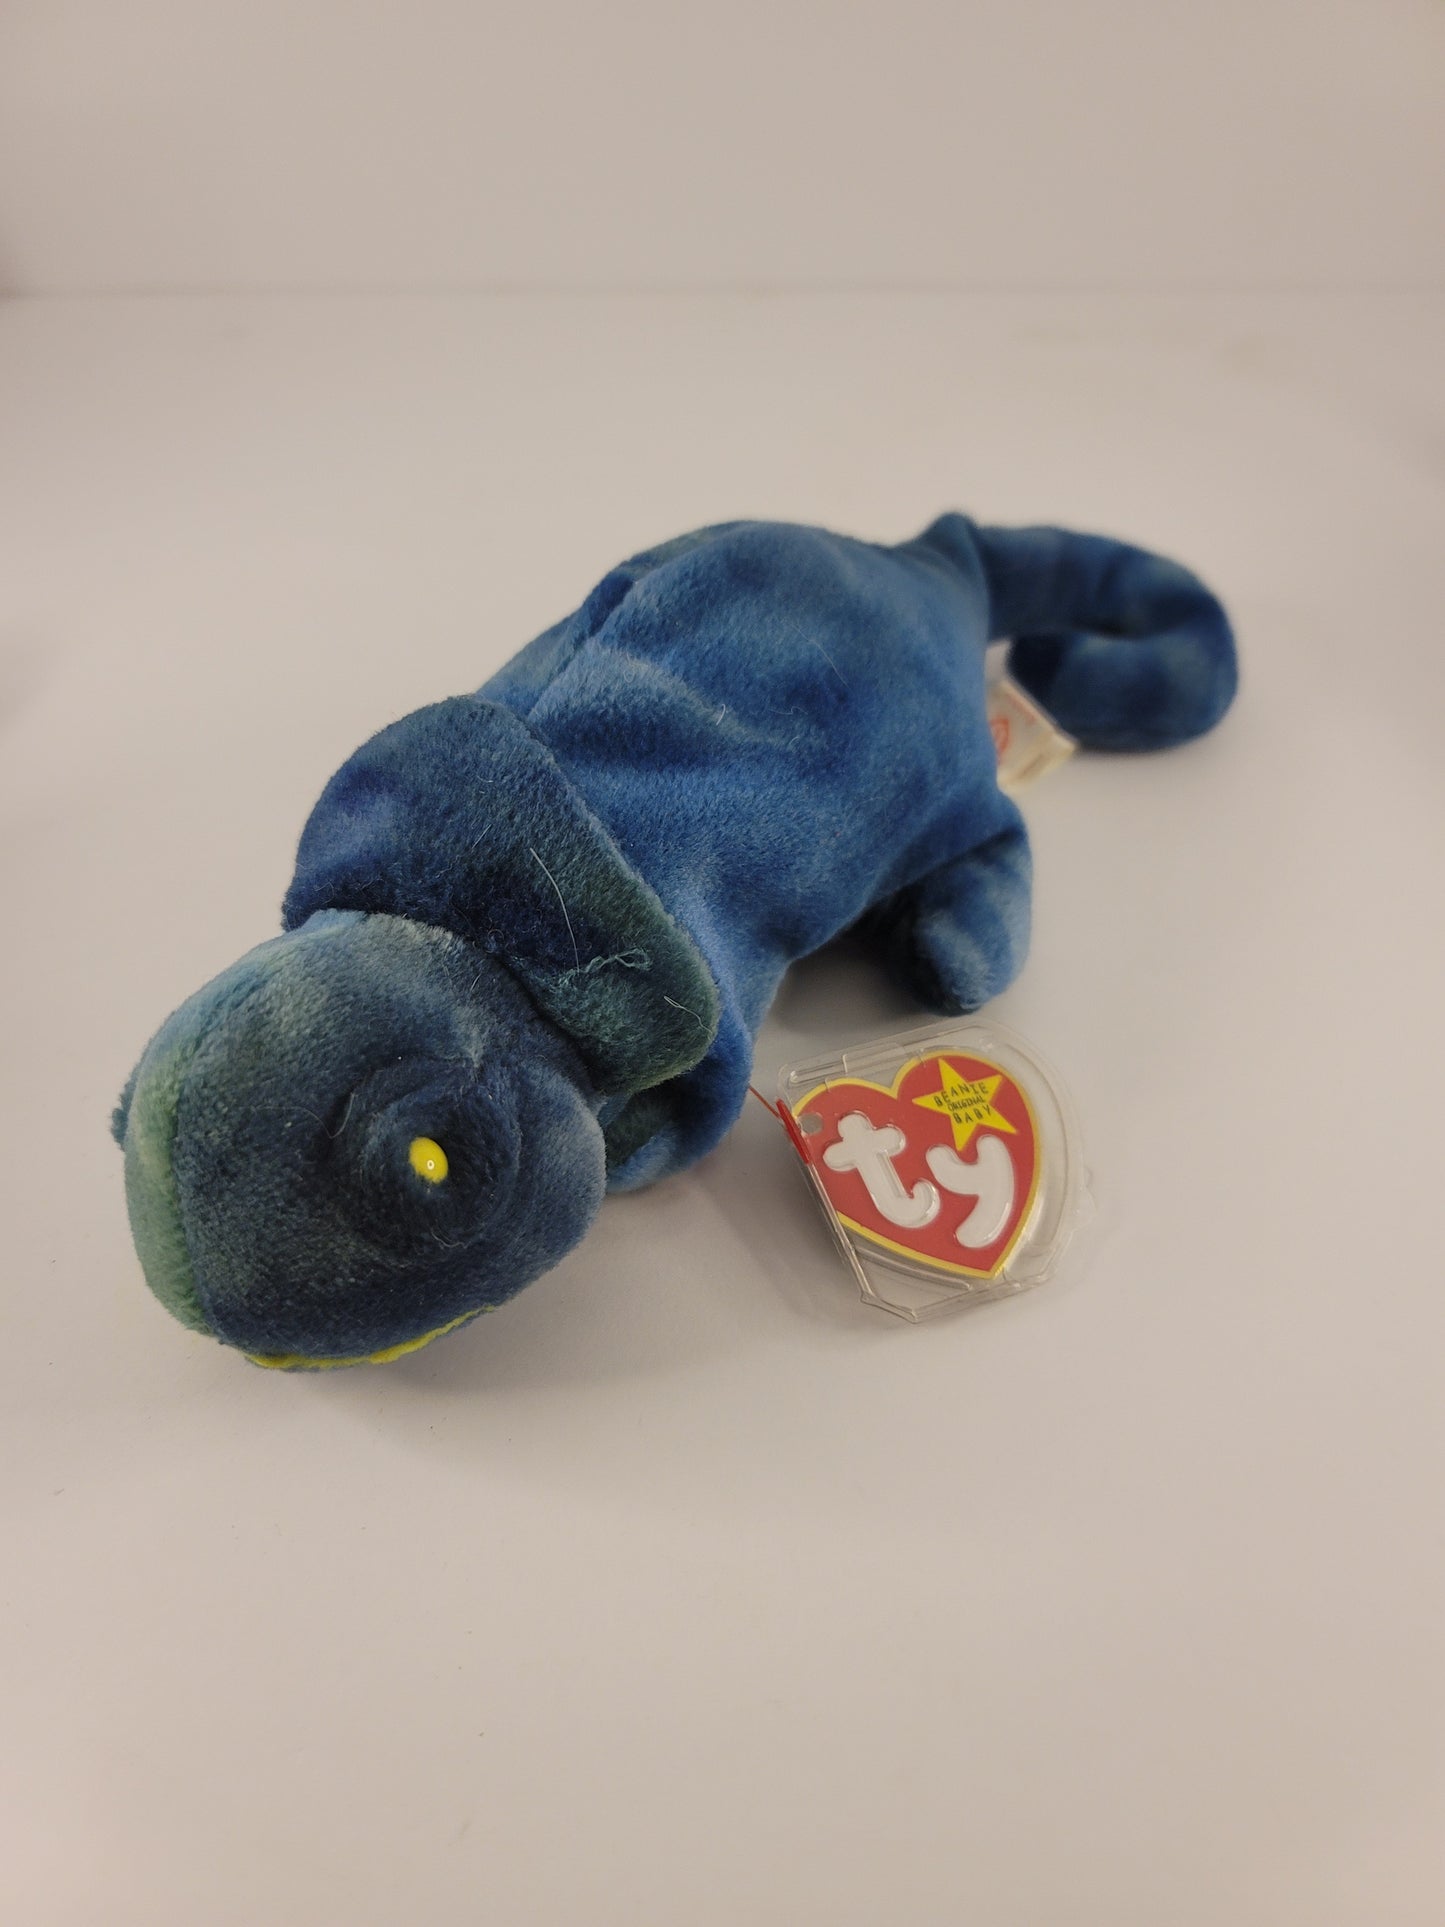 Ty Beanie Baby Lots of 3 Lizards